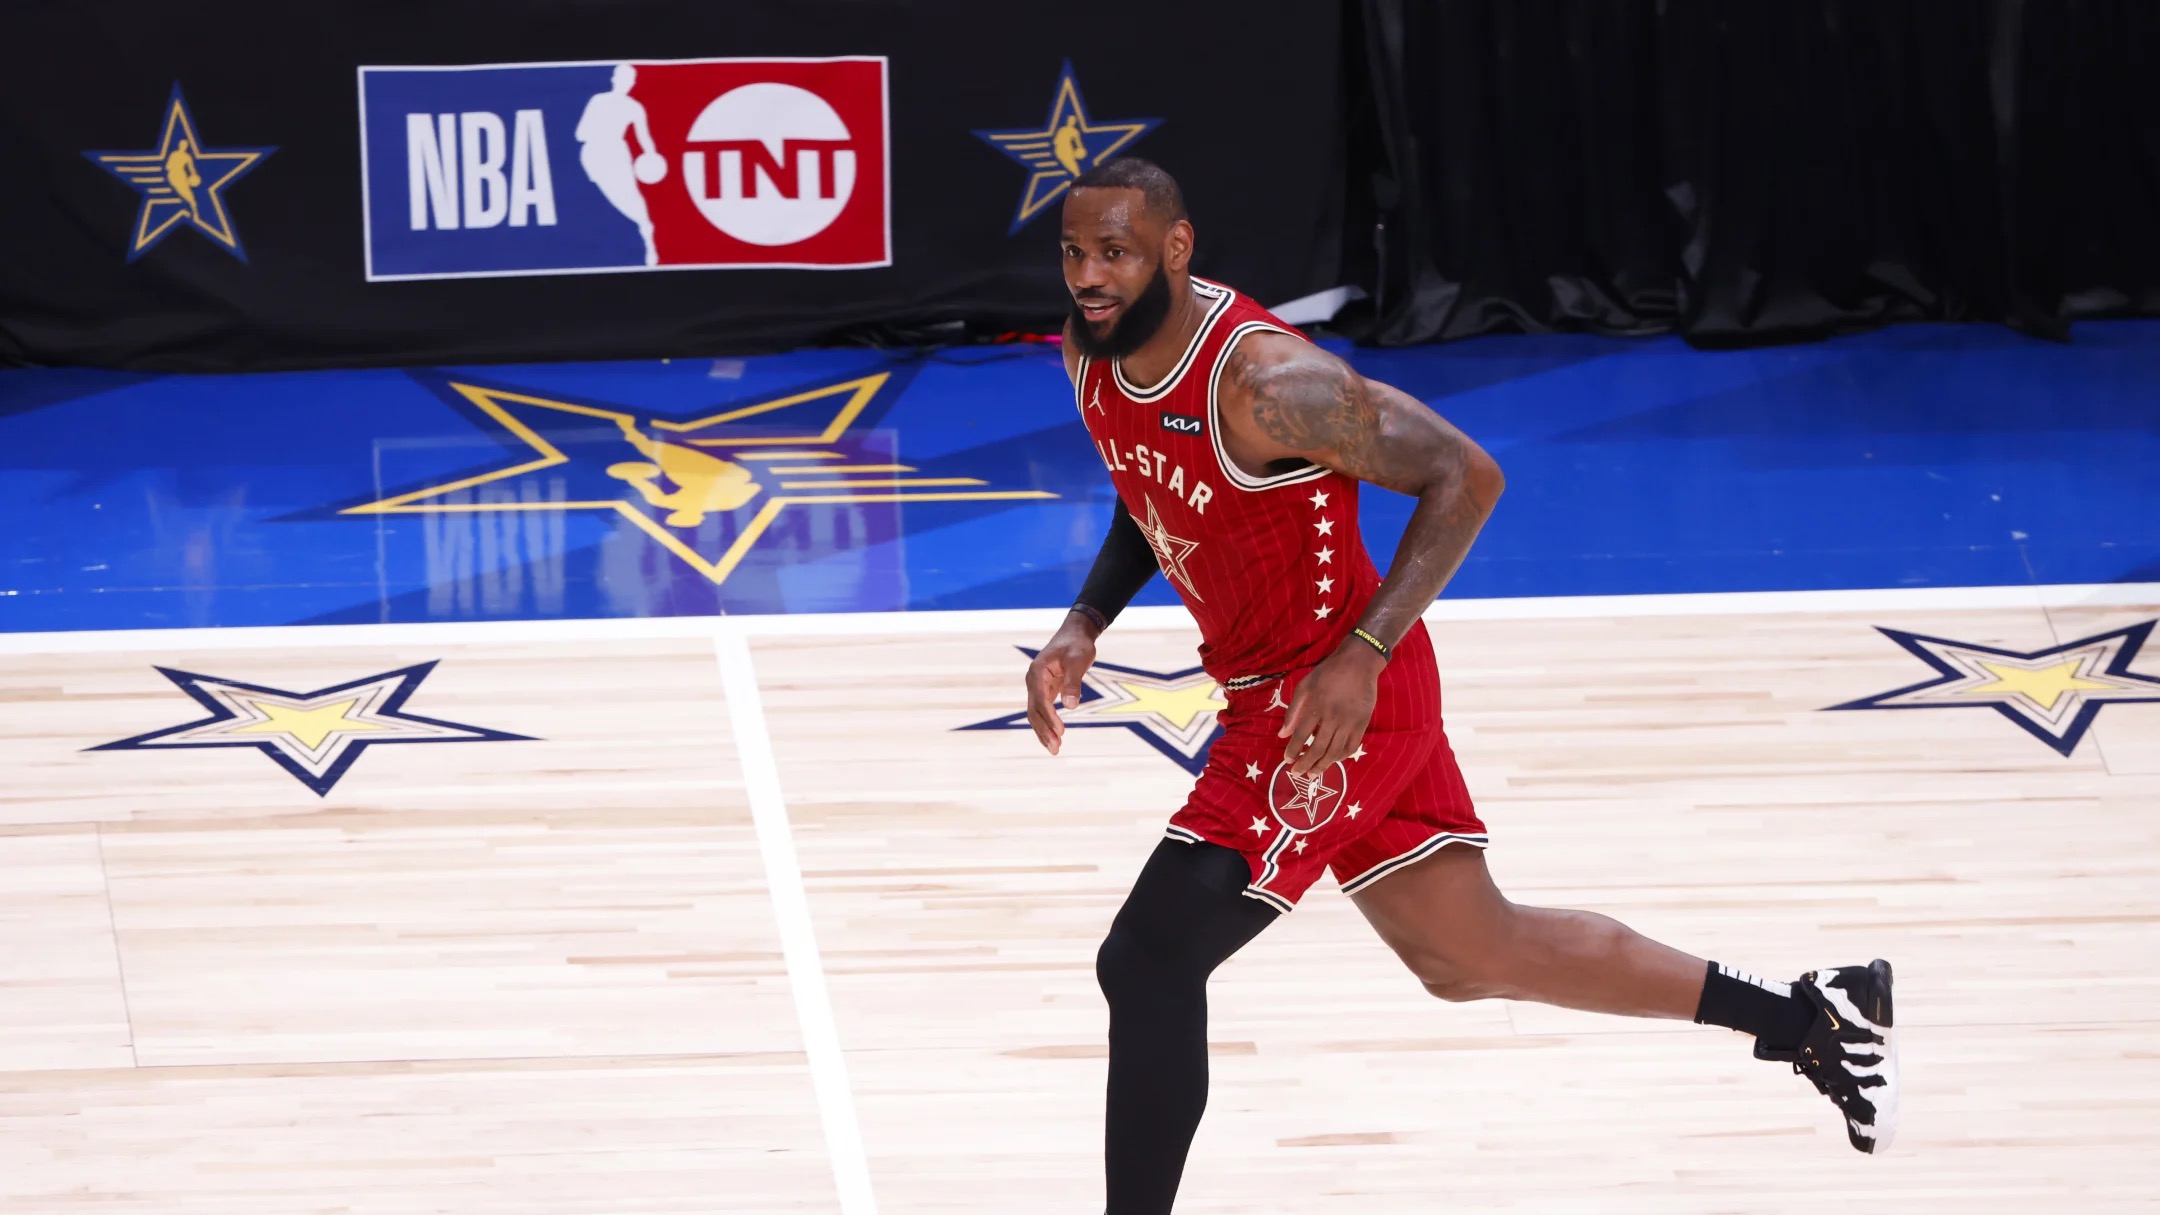 Lebron james at the all star game